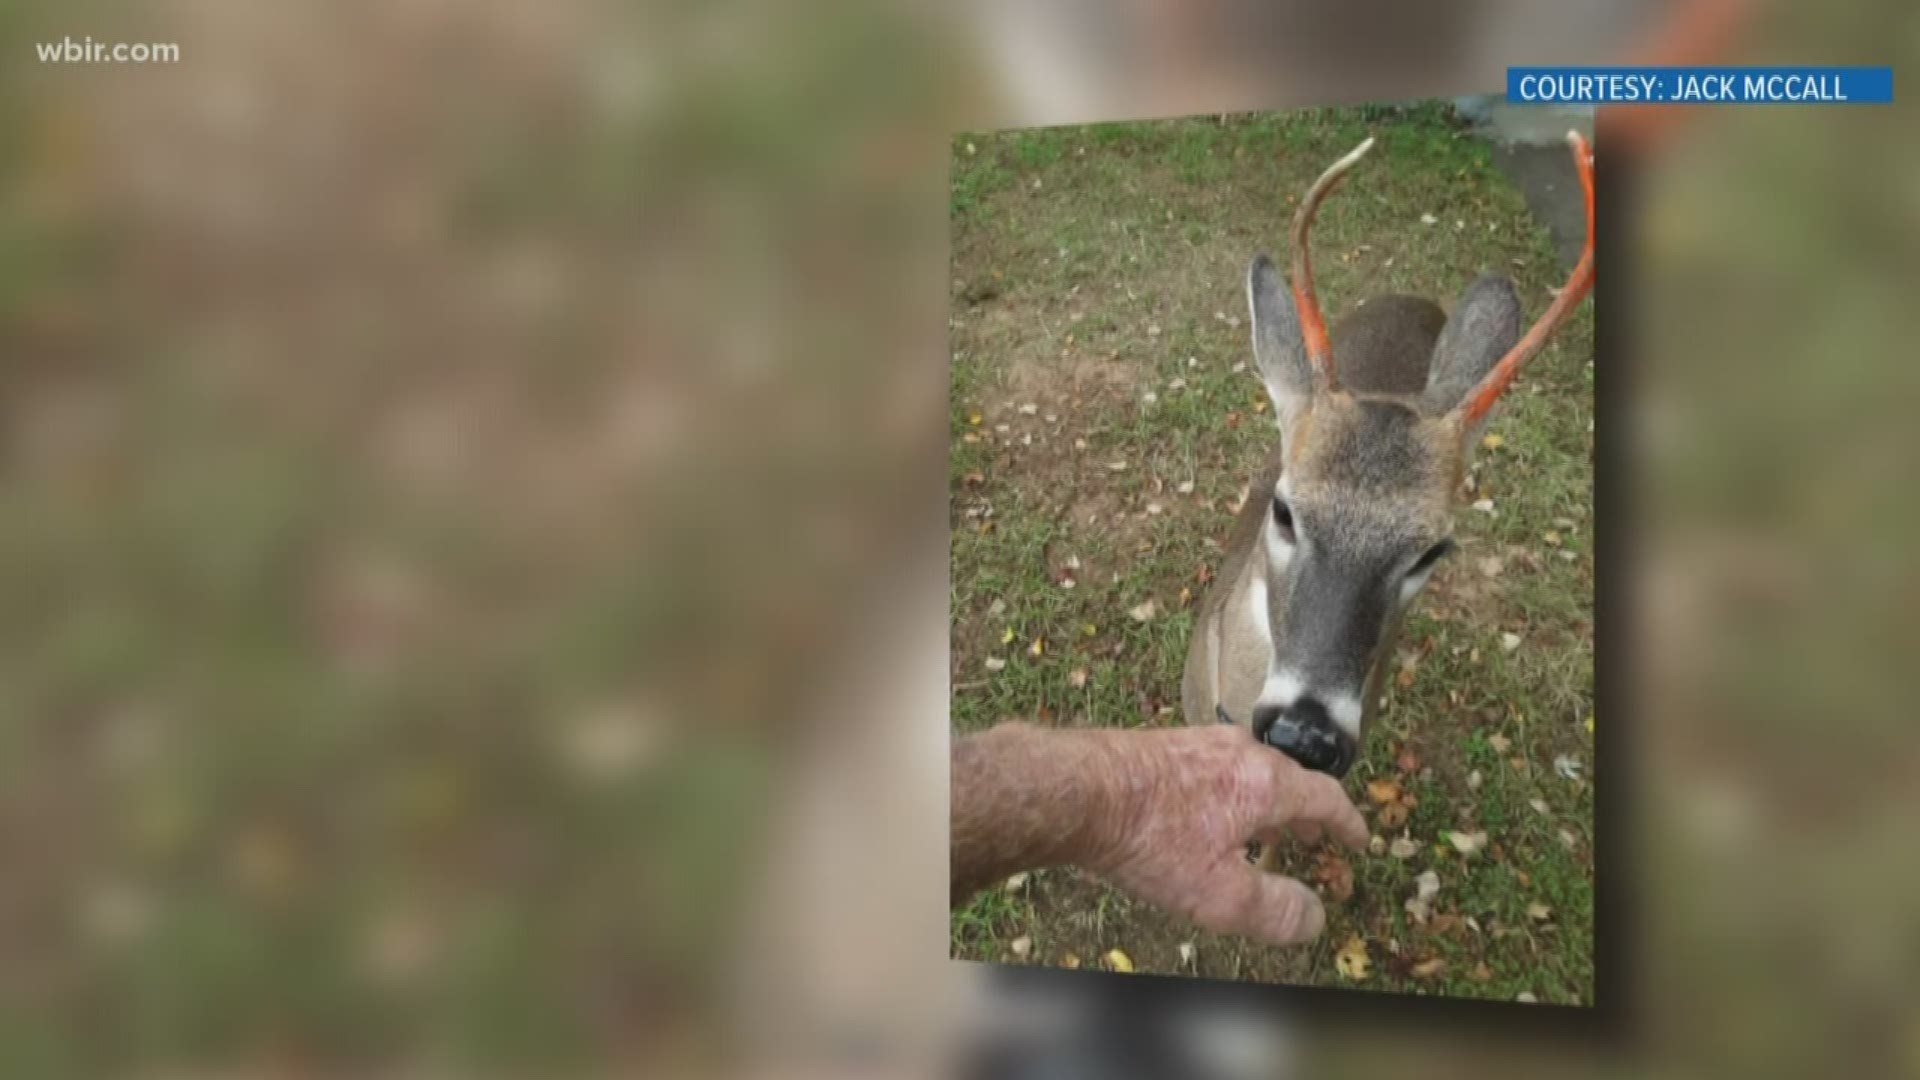 Wildlife officers said the deer began goring the Tellico Plains woman with its antlers.